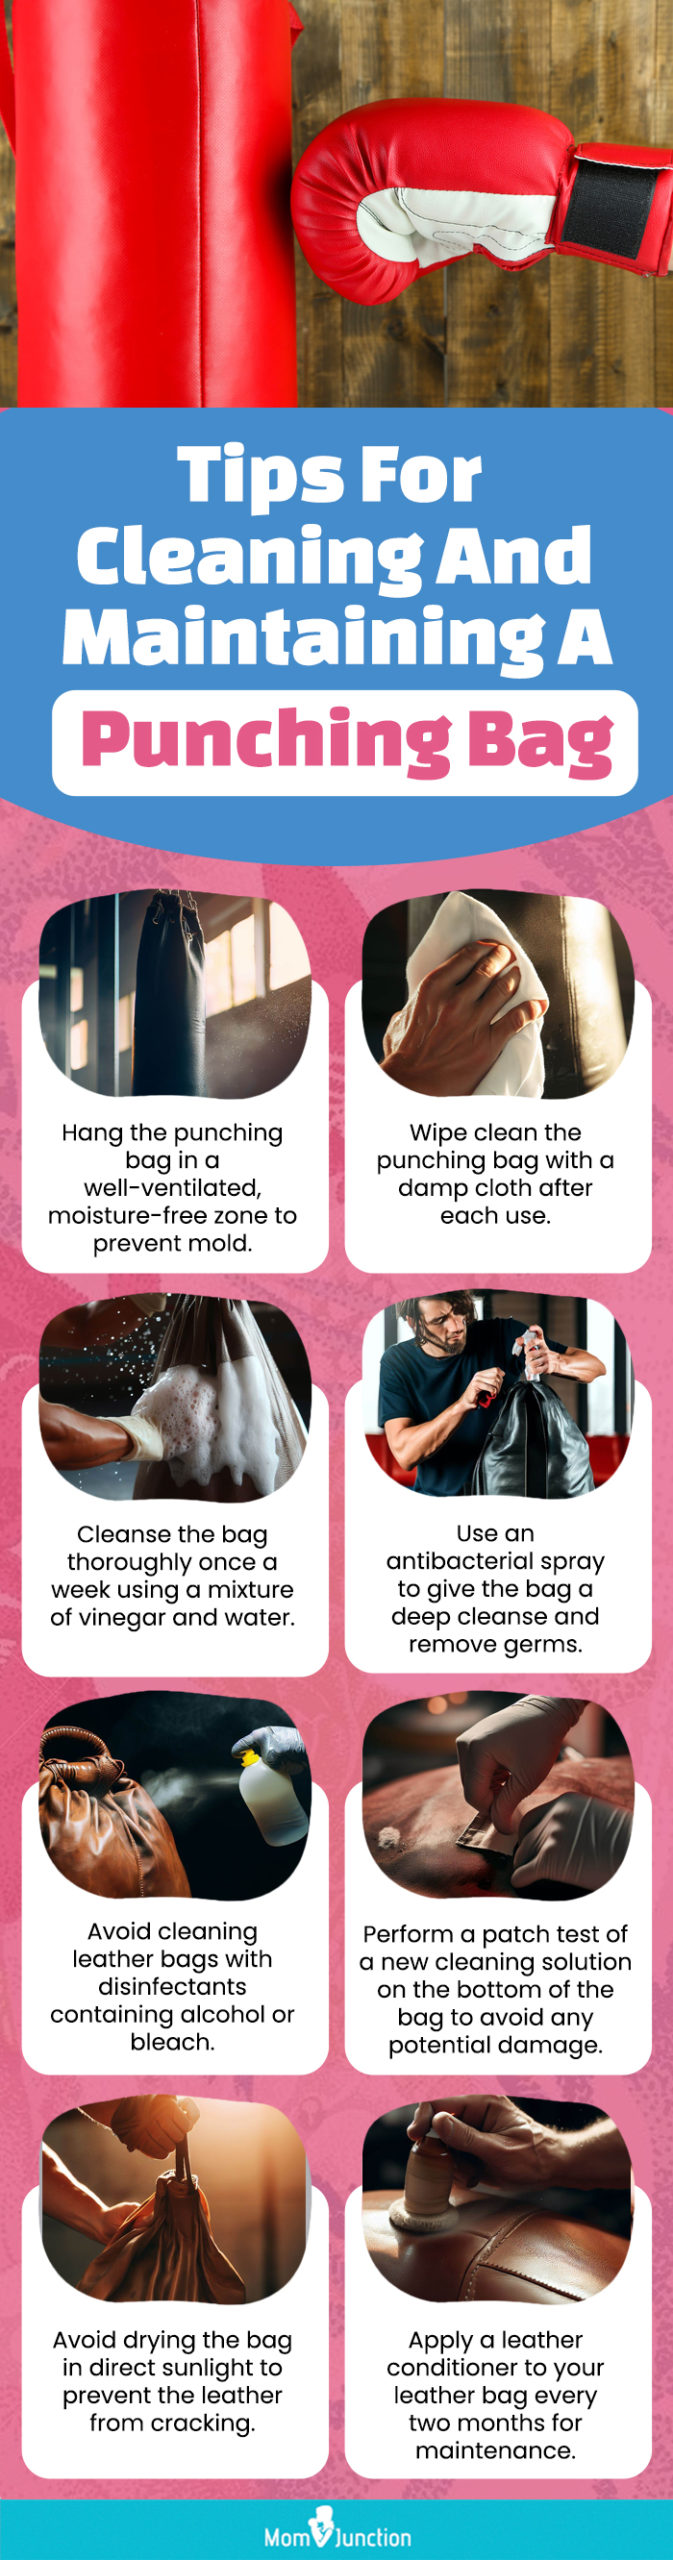 Tips For Cleaning And Maintaining A Punching Bag (infographic)